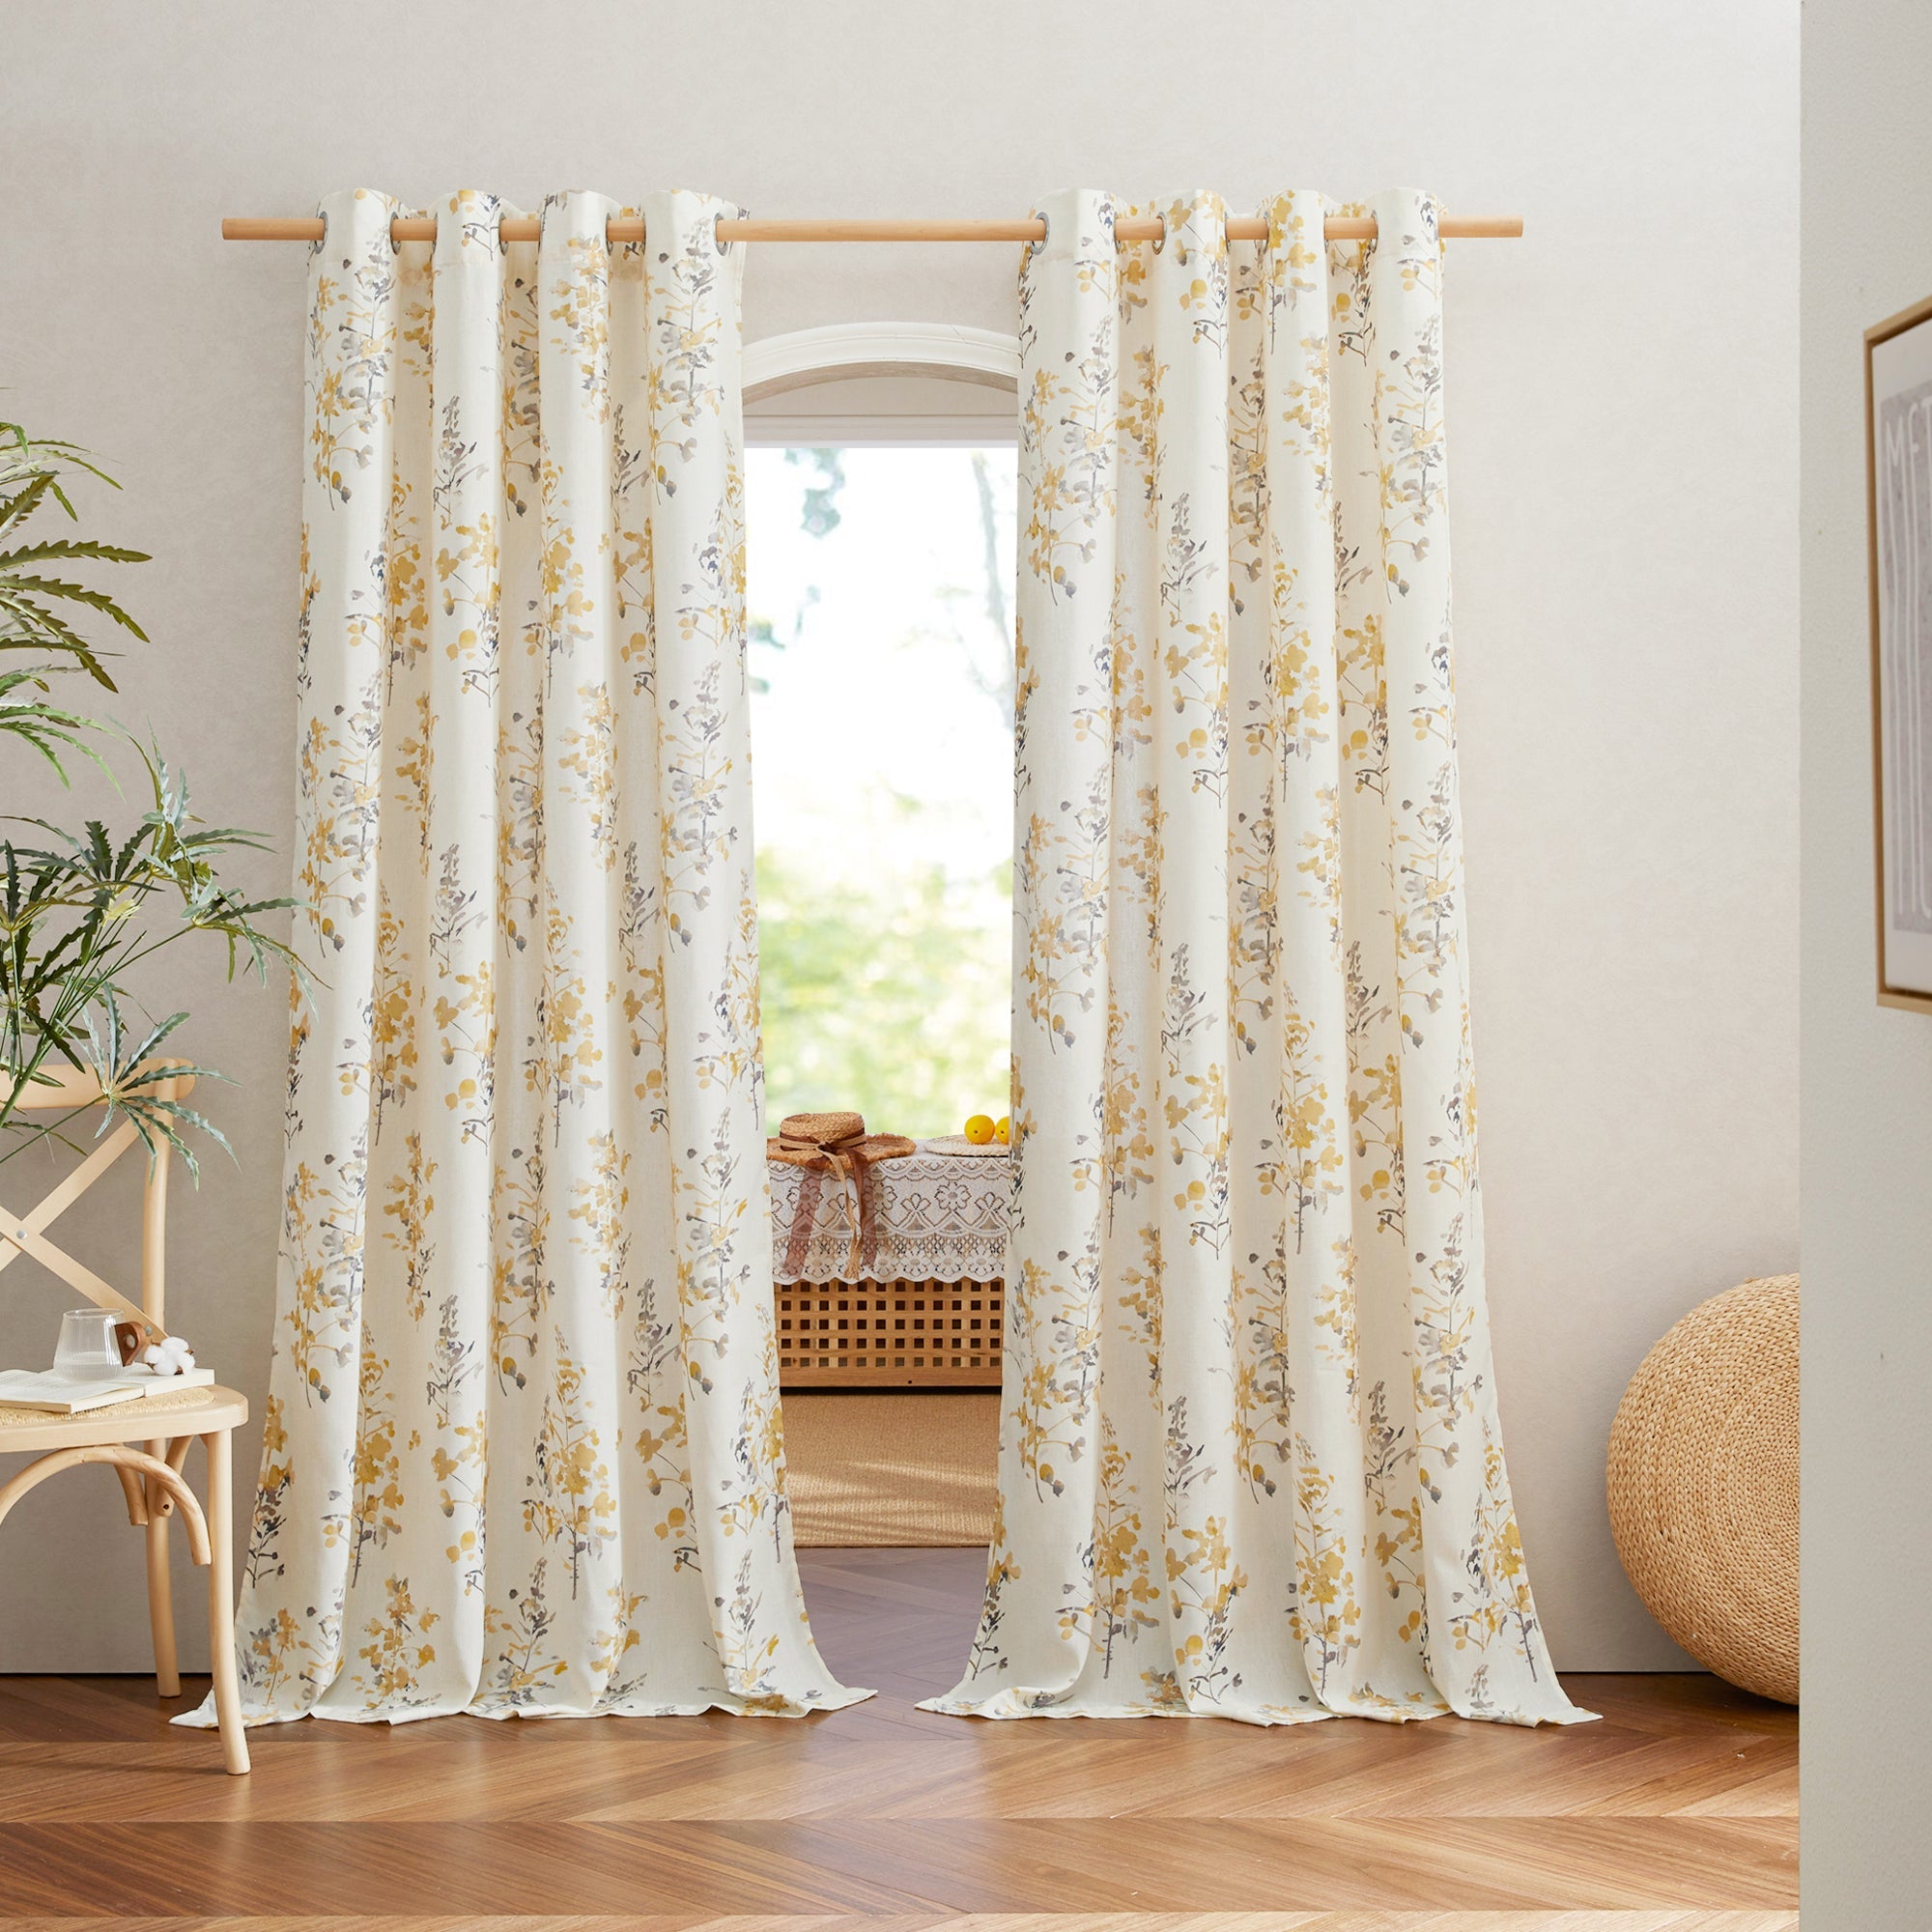 Grommet Linen Textured Sheer Ink Tree Branch Curtains For Living Room And Bedroom 2 Panels KGORGE Store